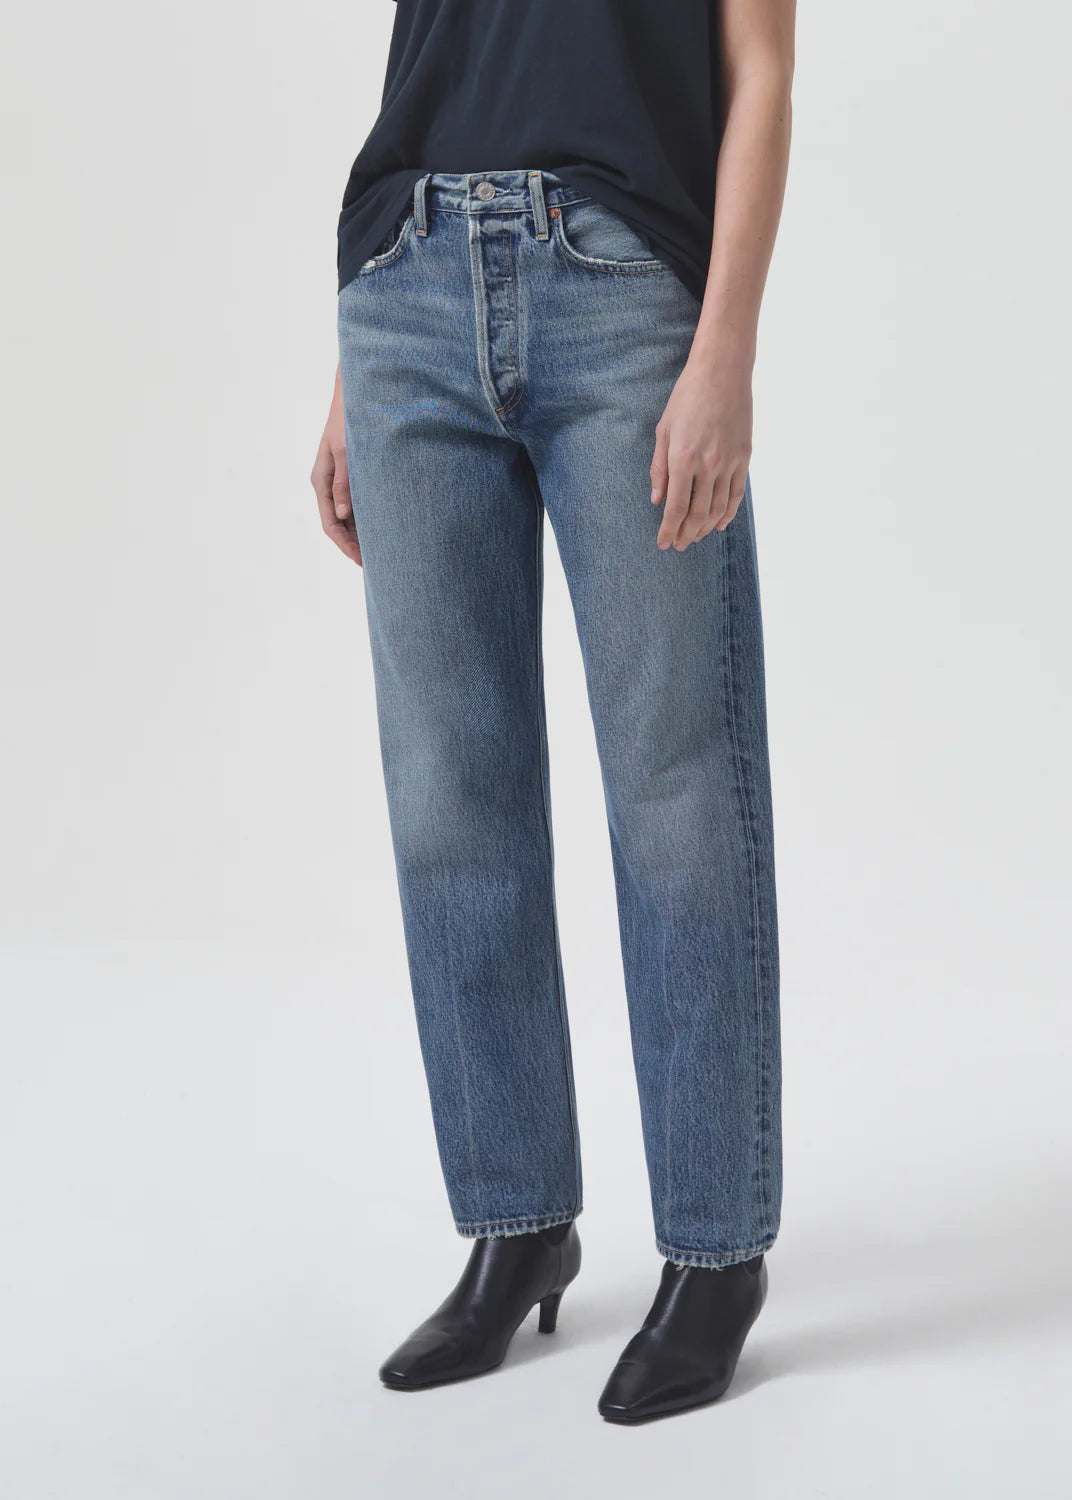 90's Jean in Hooked (Organic Cotton)